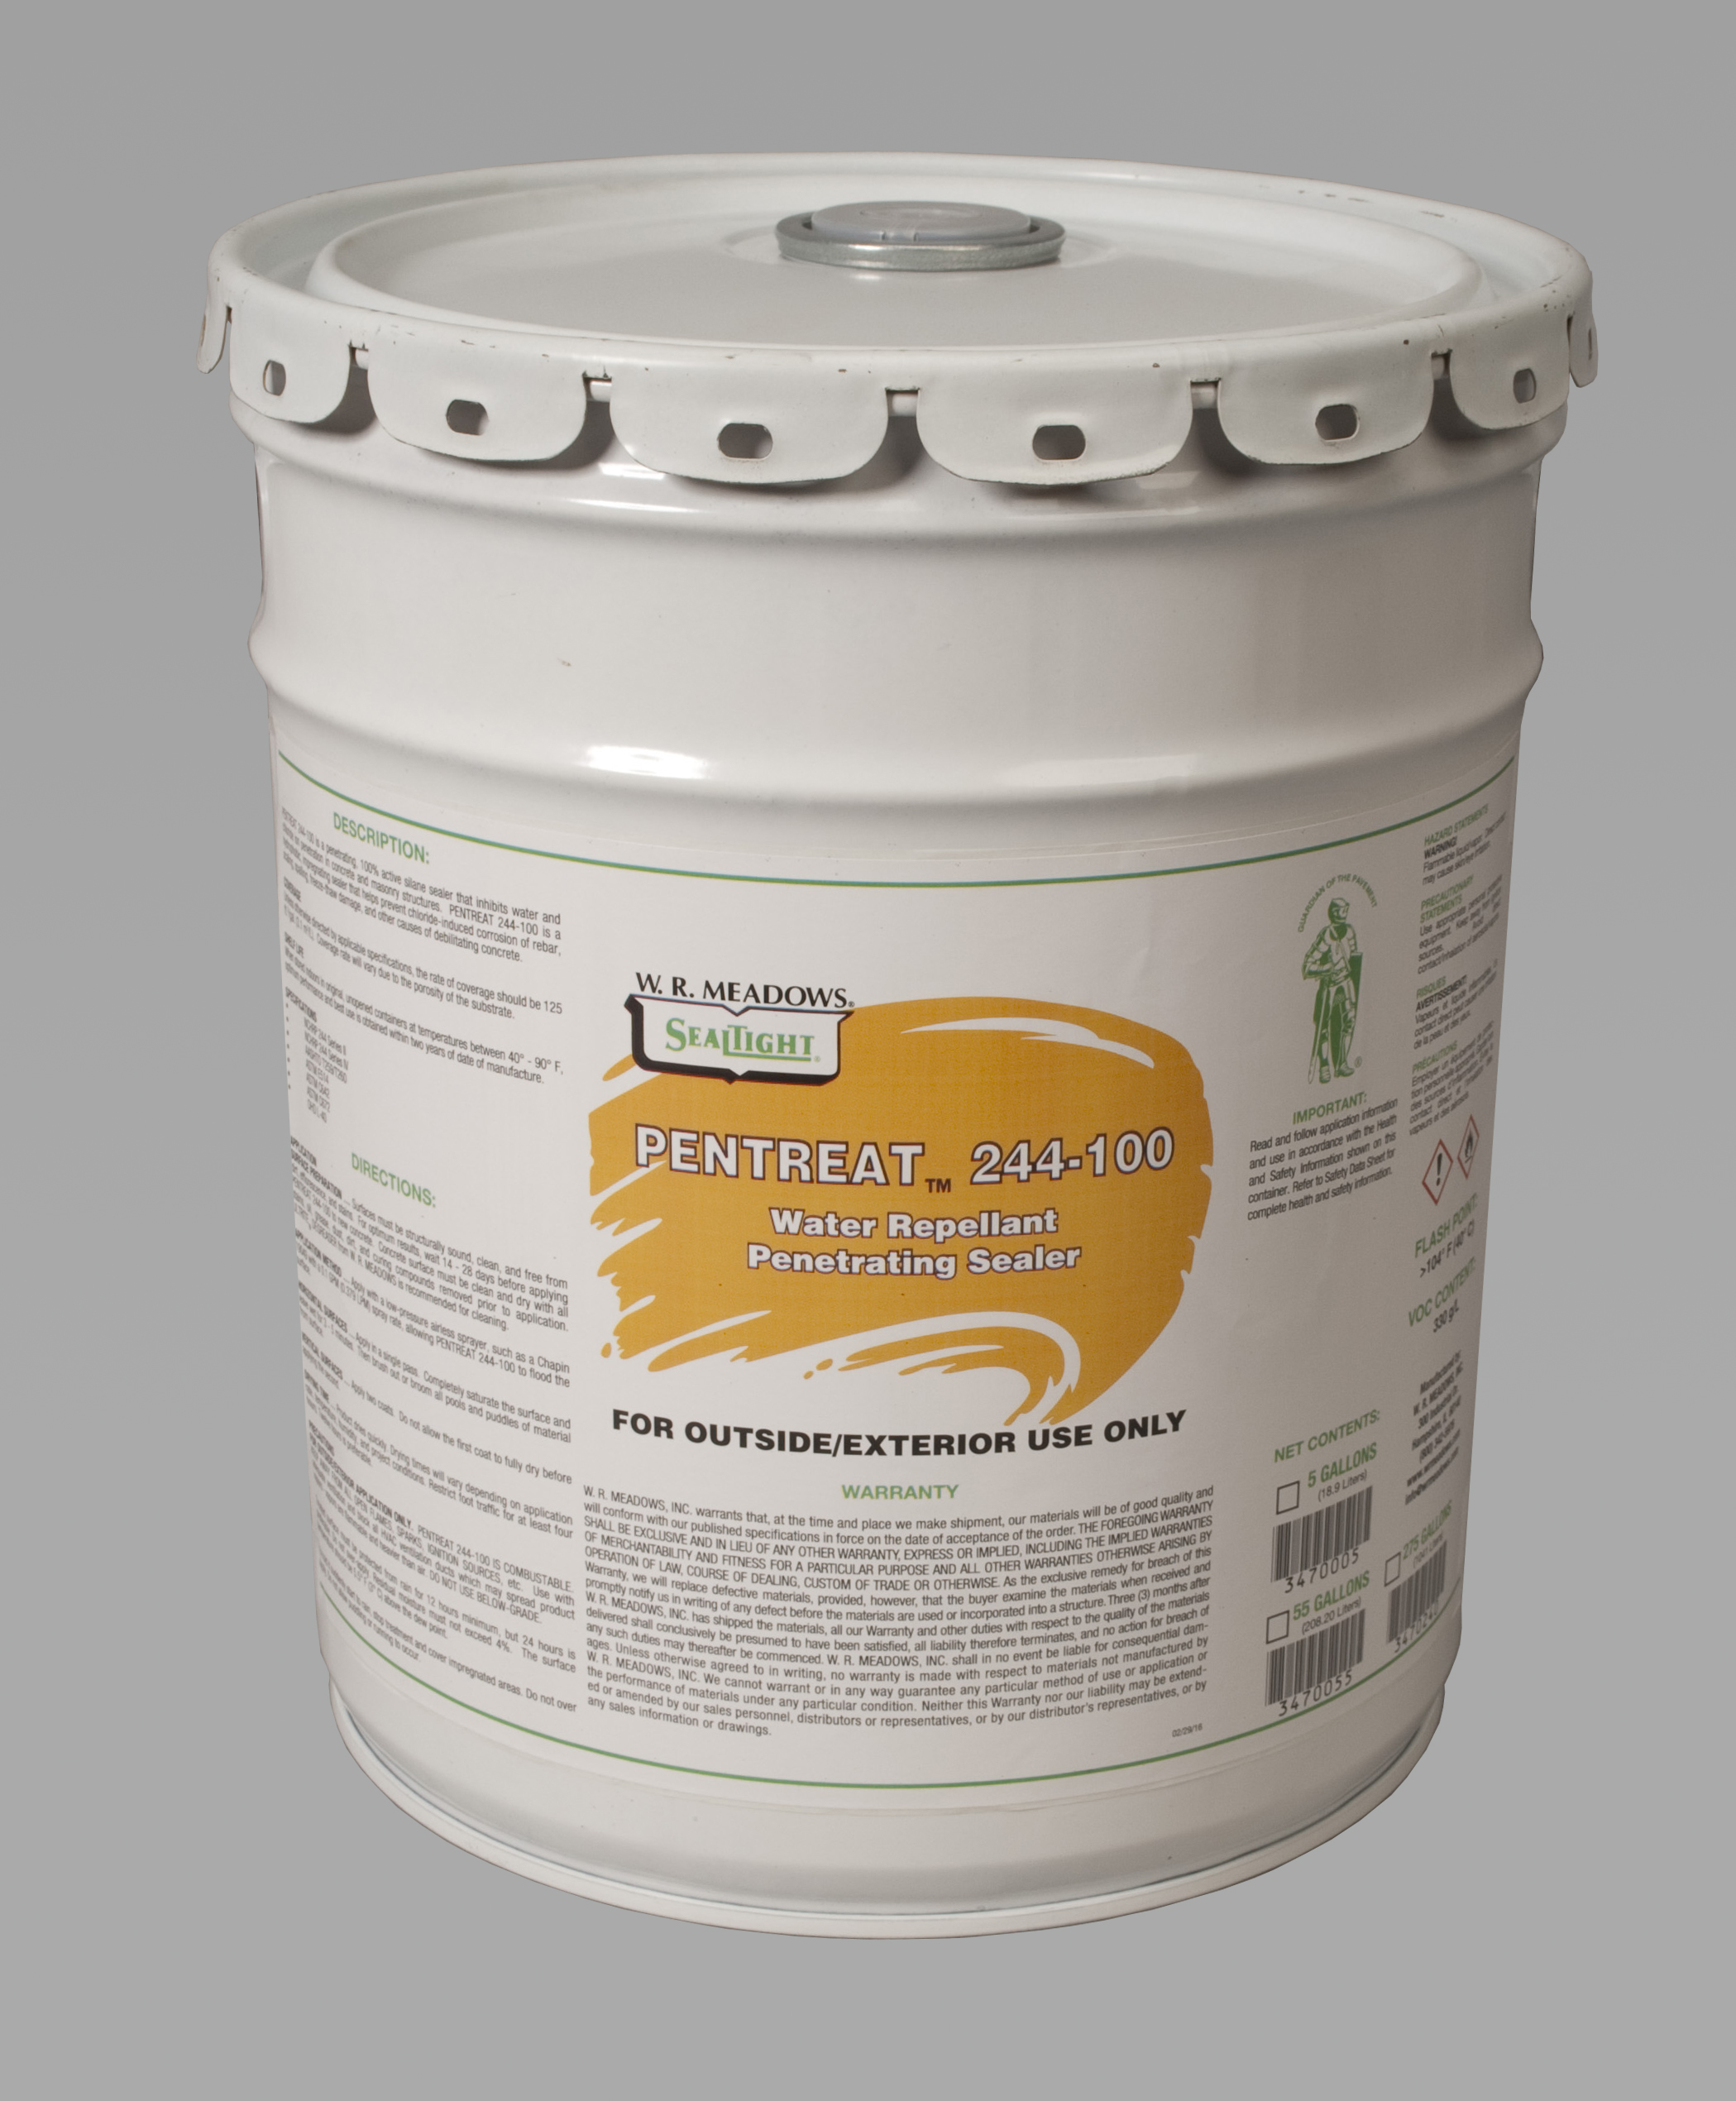 W. R. Meadows will introduce Pentreat 244-100, a new hydrophobic impregnating sealer used on all types of concrete